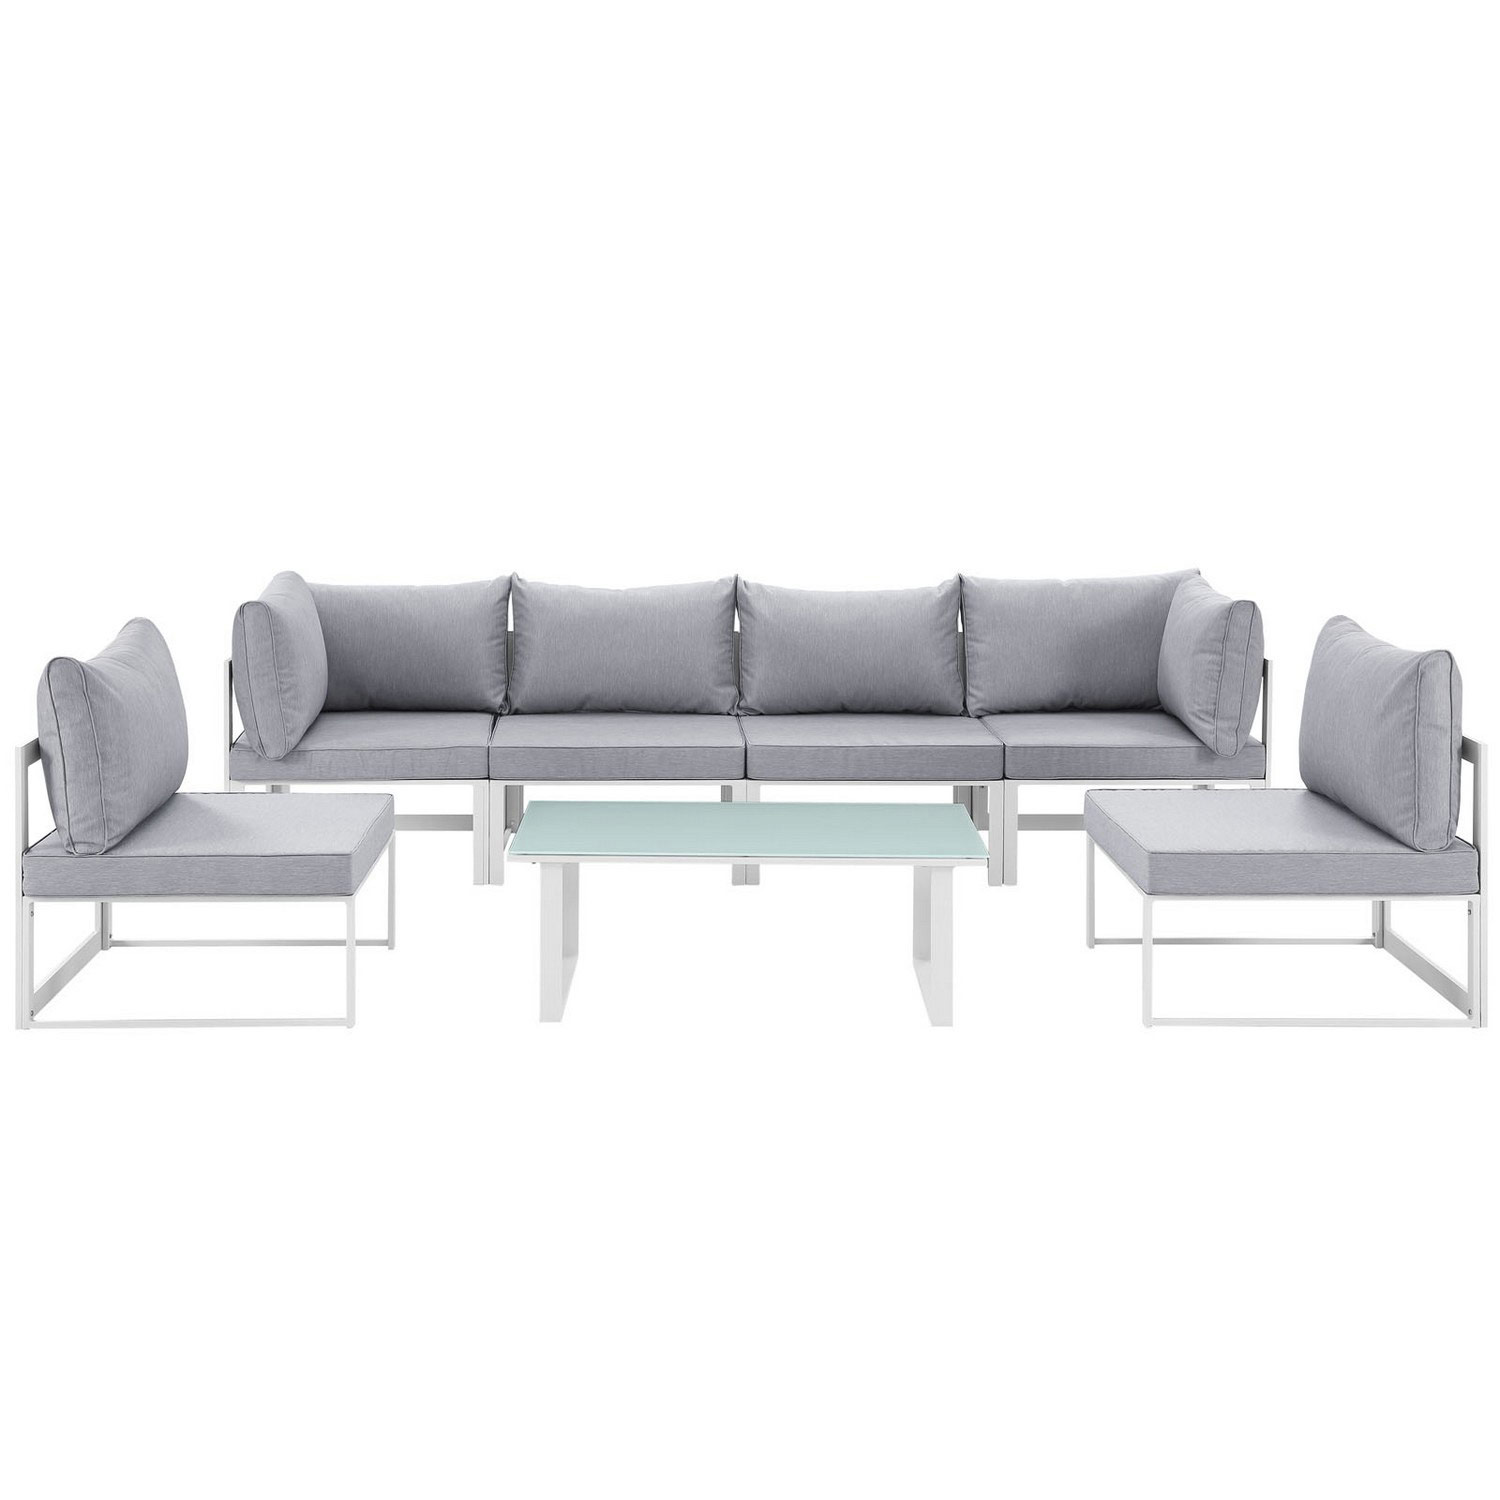 Modway Fortuna 7 Piece Outdoor Patio Sectional Sofa Set - White/Gray